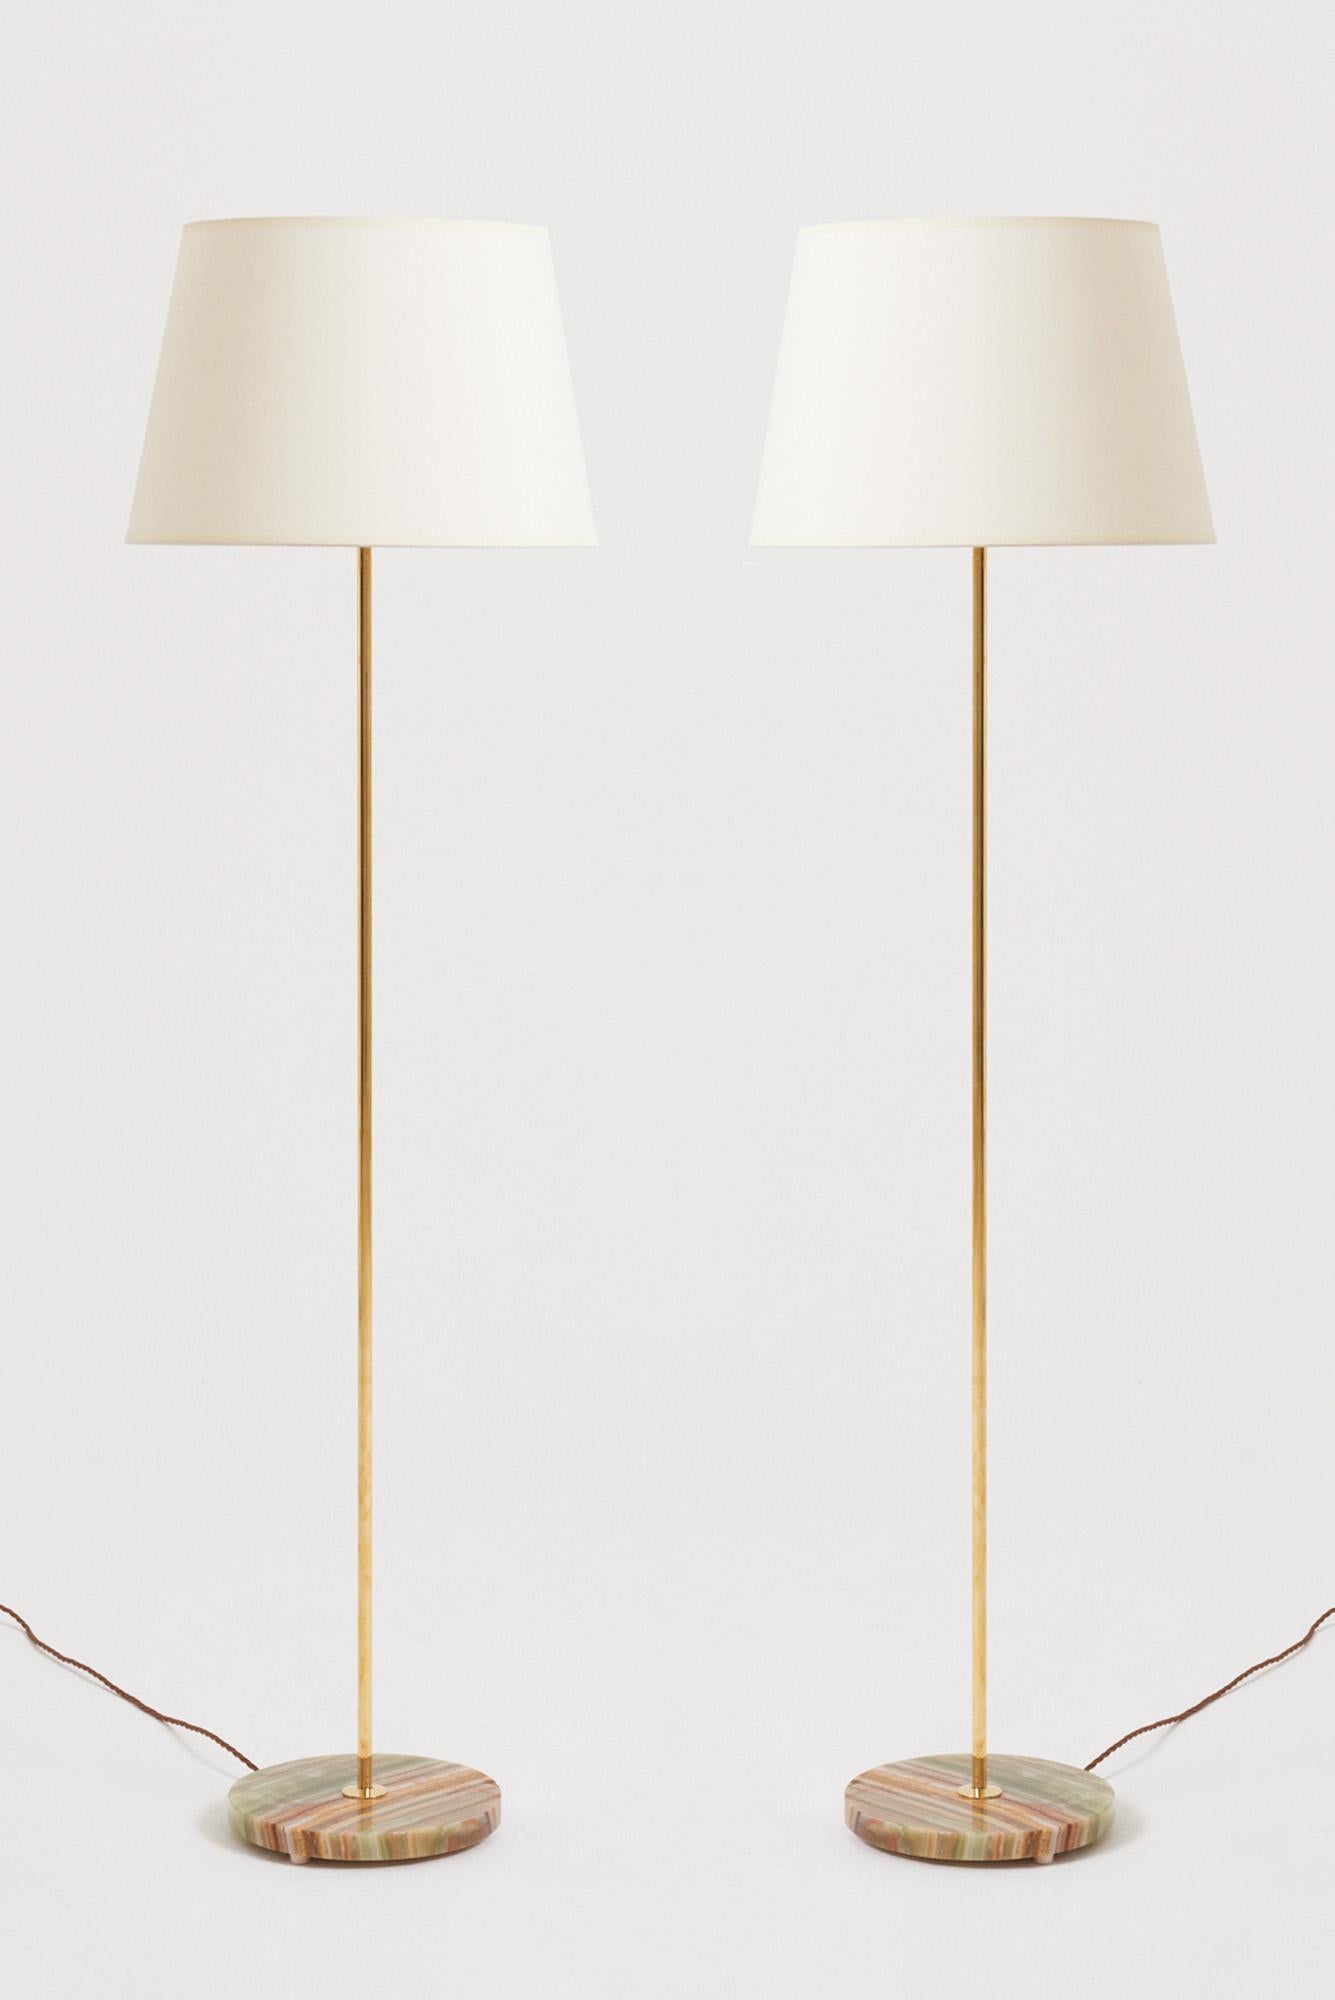 A pair of brass and solid onyx base floor lamps.
Sweden, 1960-1970s
With the shade: 138.5 cm high by 40.5 cm diameter
Lamp base only: 120.5 cm high by 23.5 cm diameter